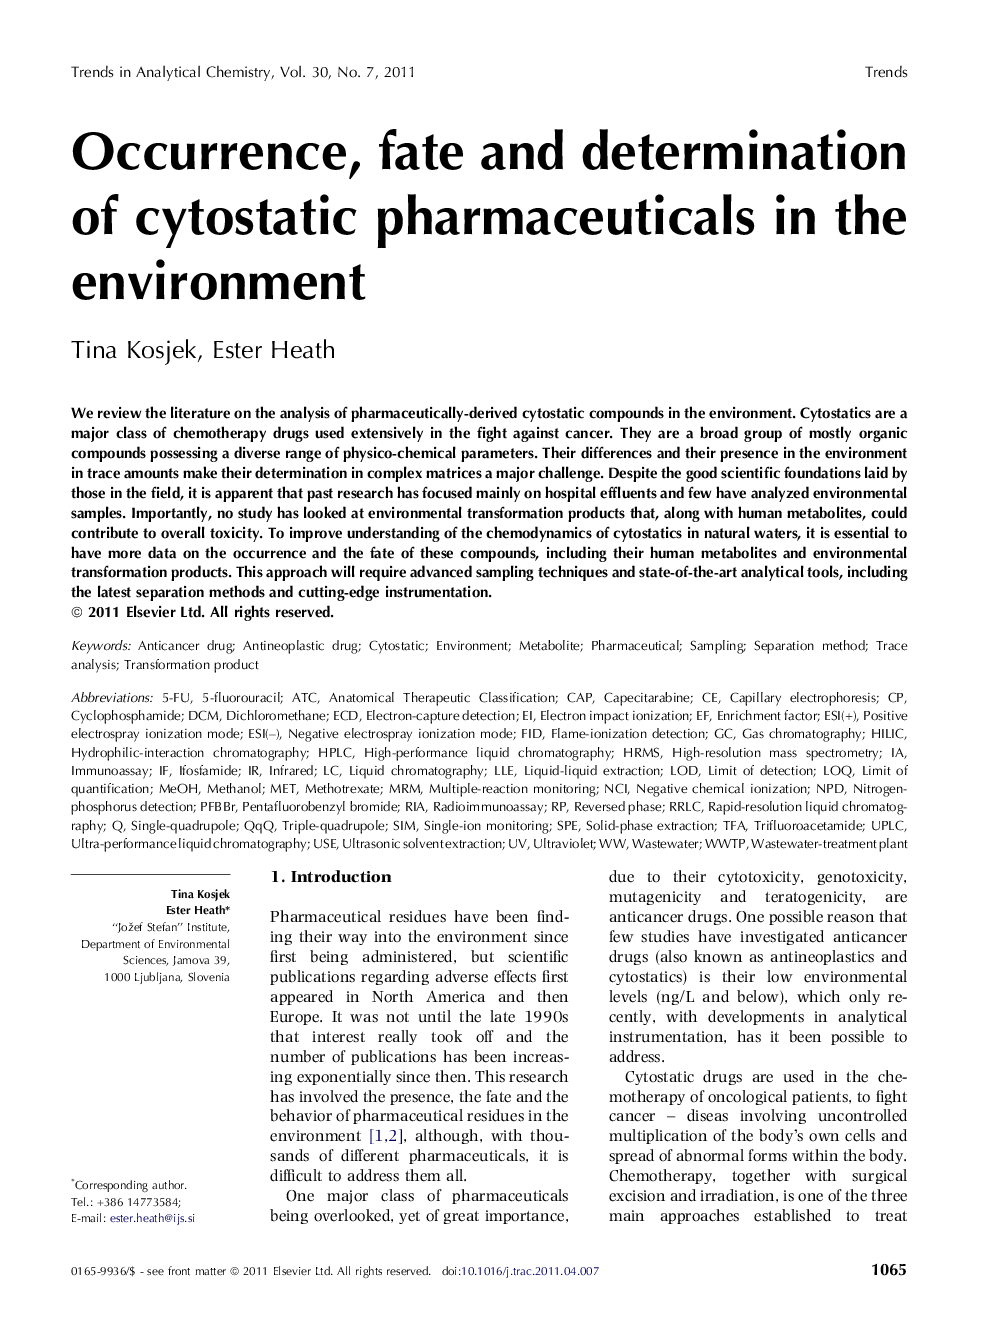 Occurrence, fate and determination of cytostatic pharmaceuticals in the environment